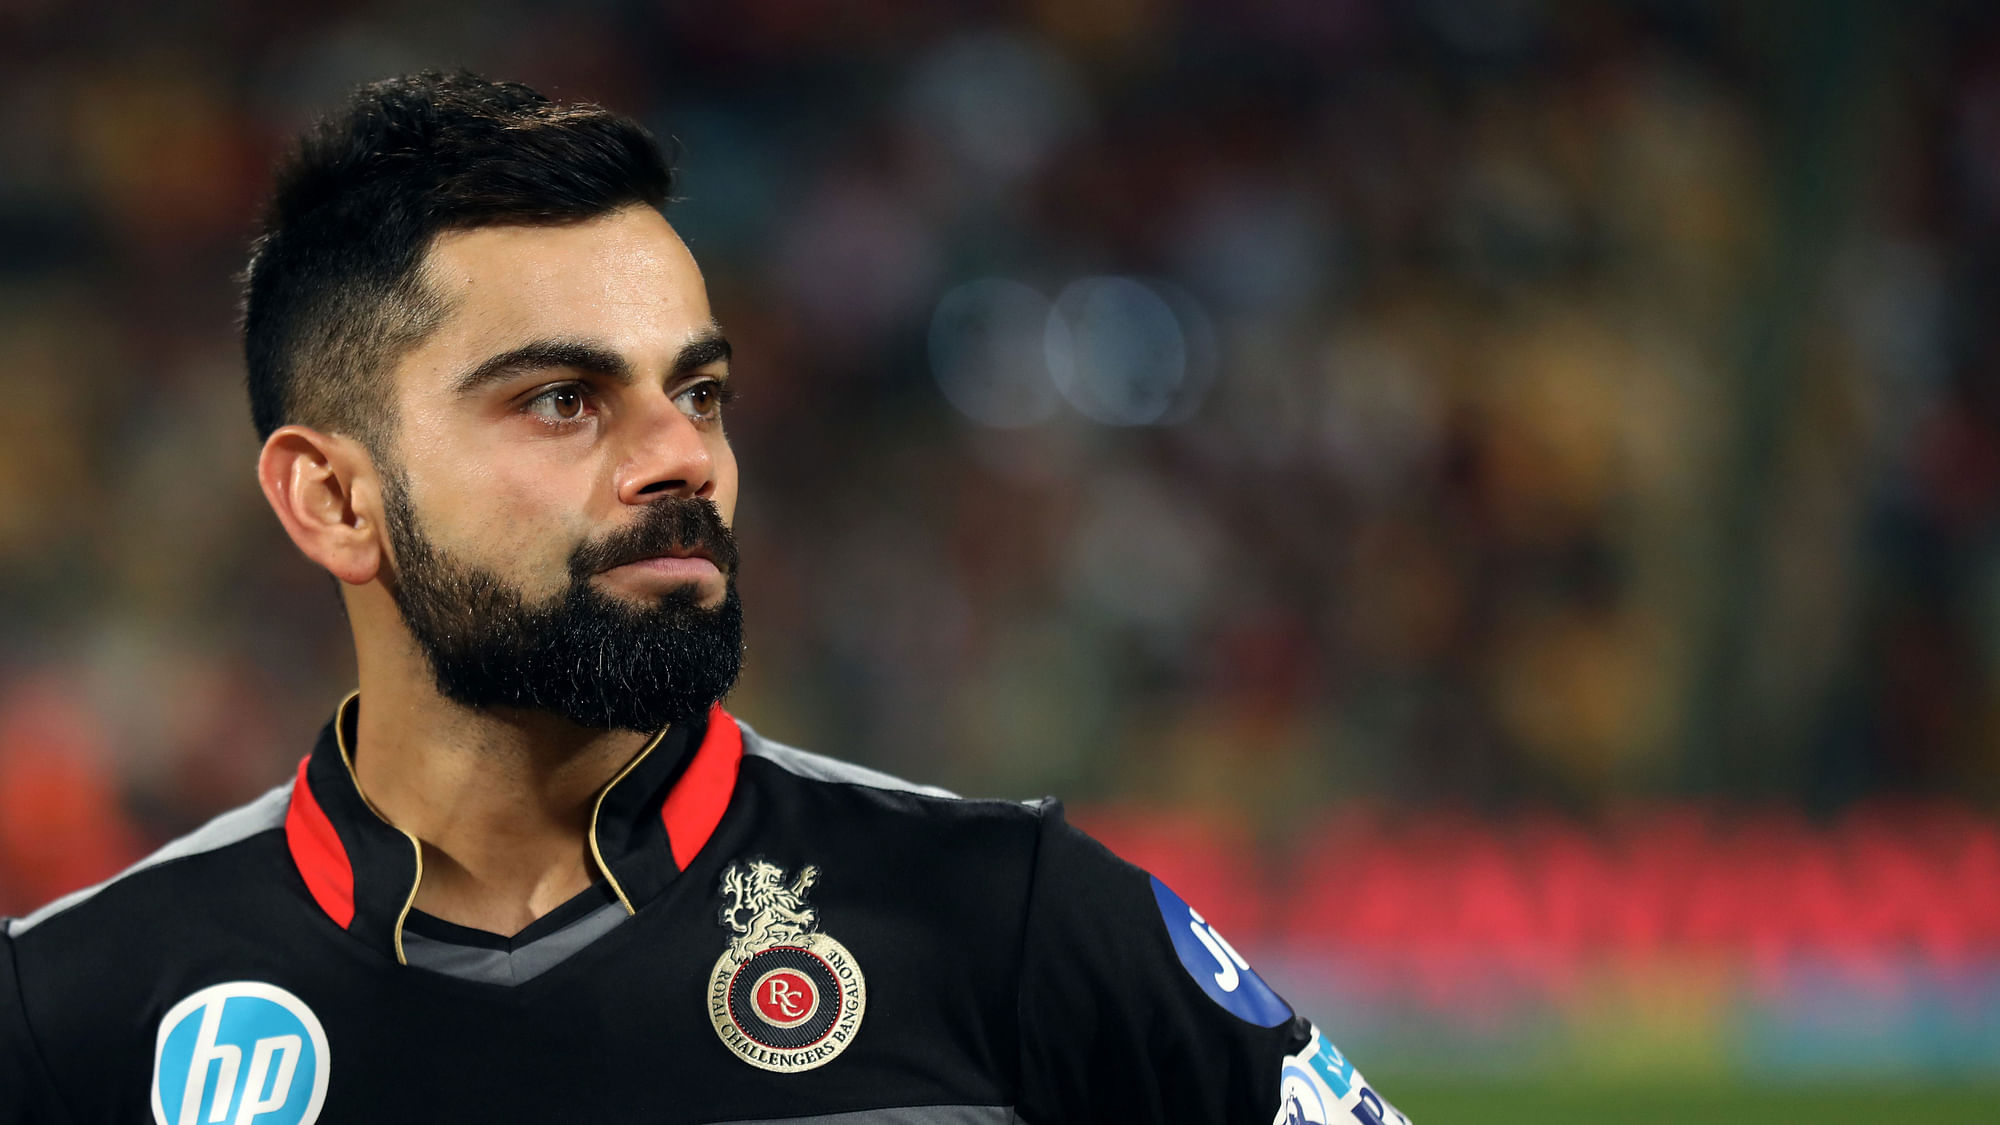 Virat Kohli’s Royal Challengers Bangalore are playing KKR in the afternoon game on Sunday.